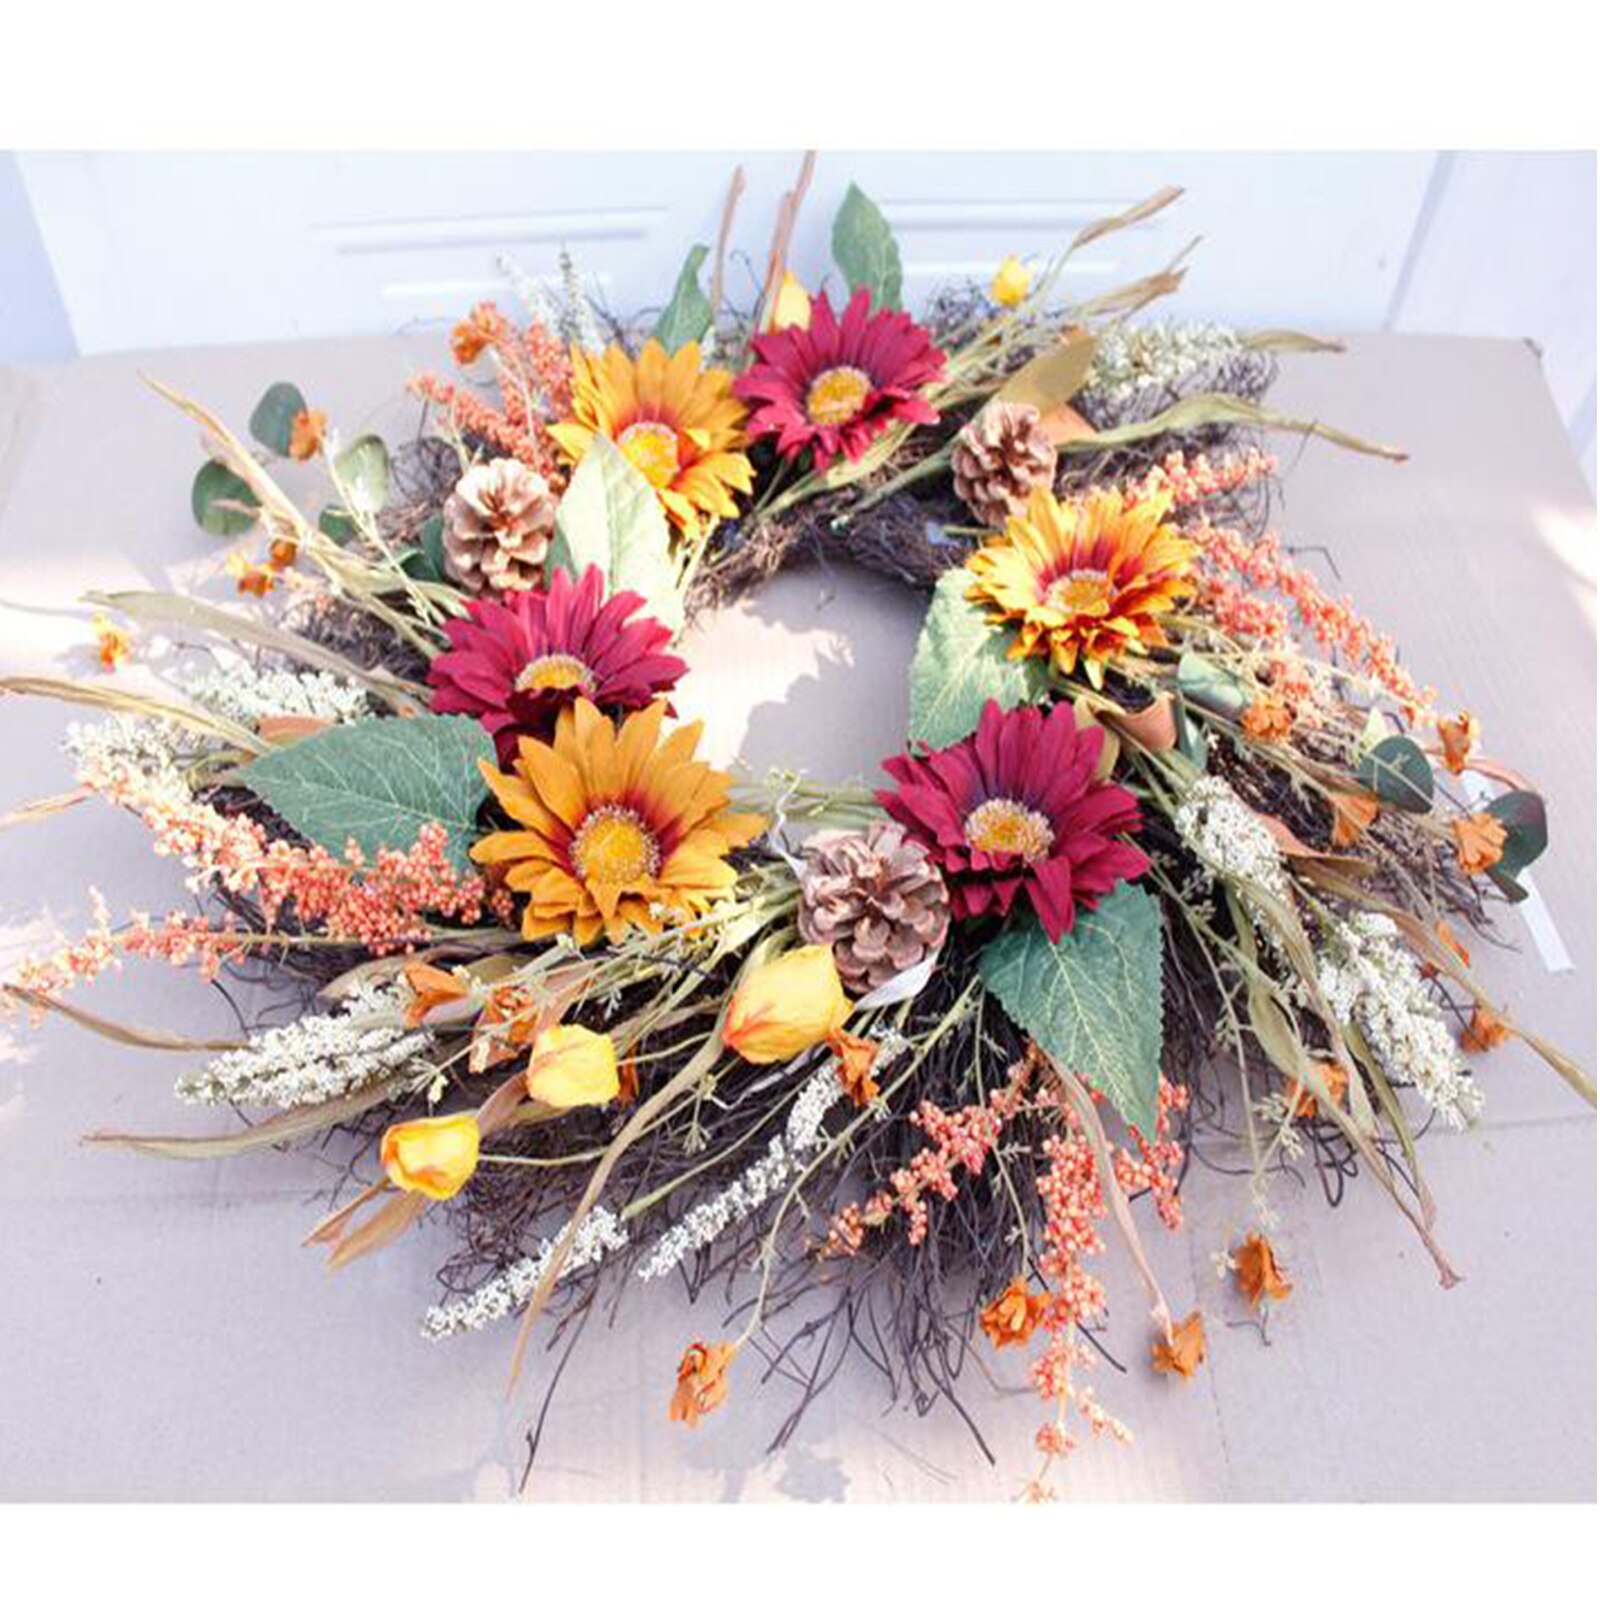 Artificial Sunflower Wreath, 2ft Large Round Wreath for Front Door Wingow Wall